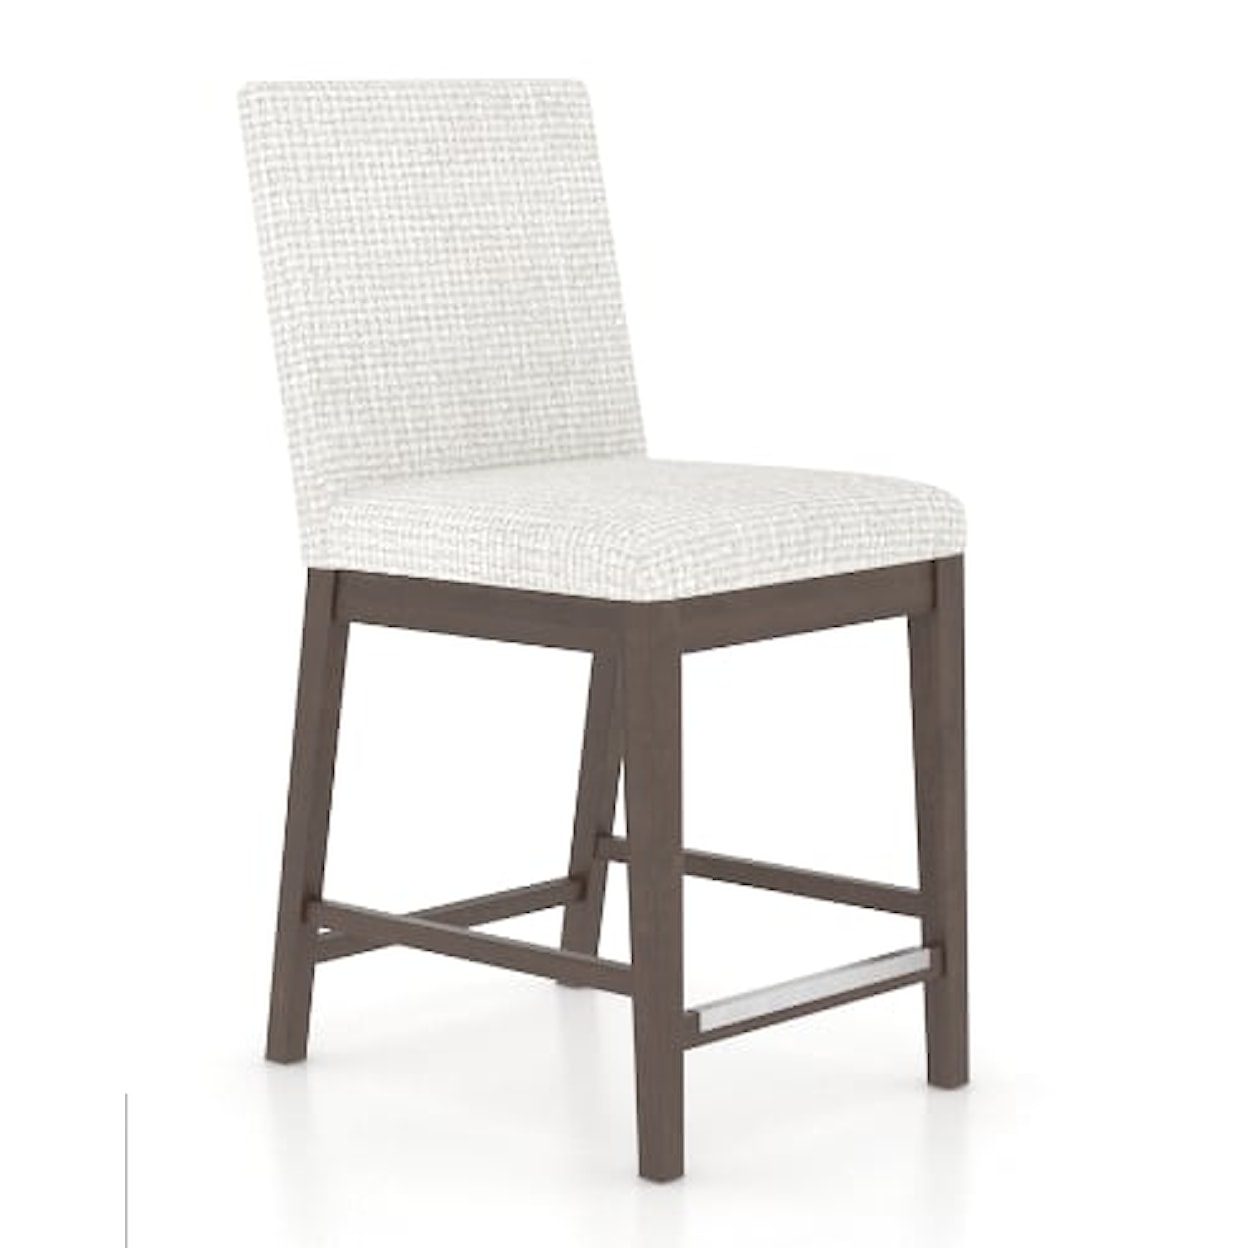 Canadel Canadel Upholstered Fixed Stool